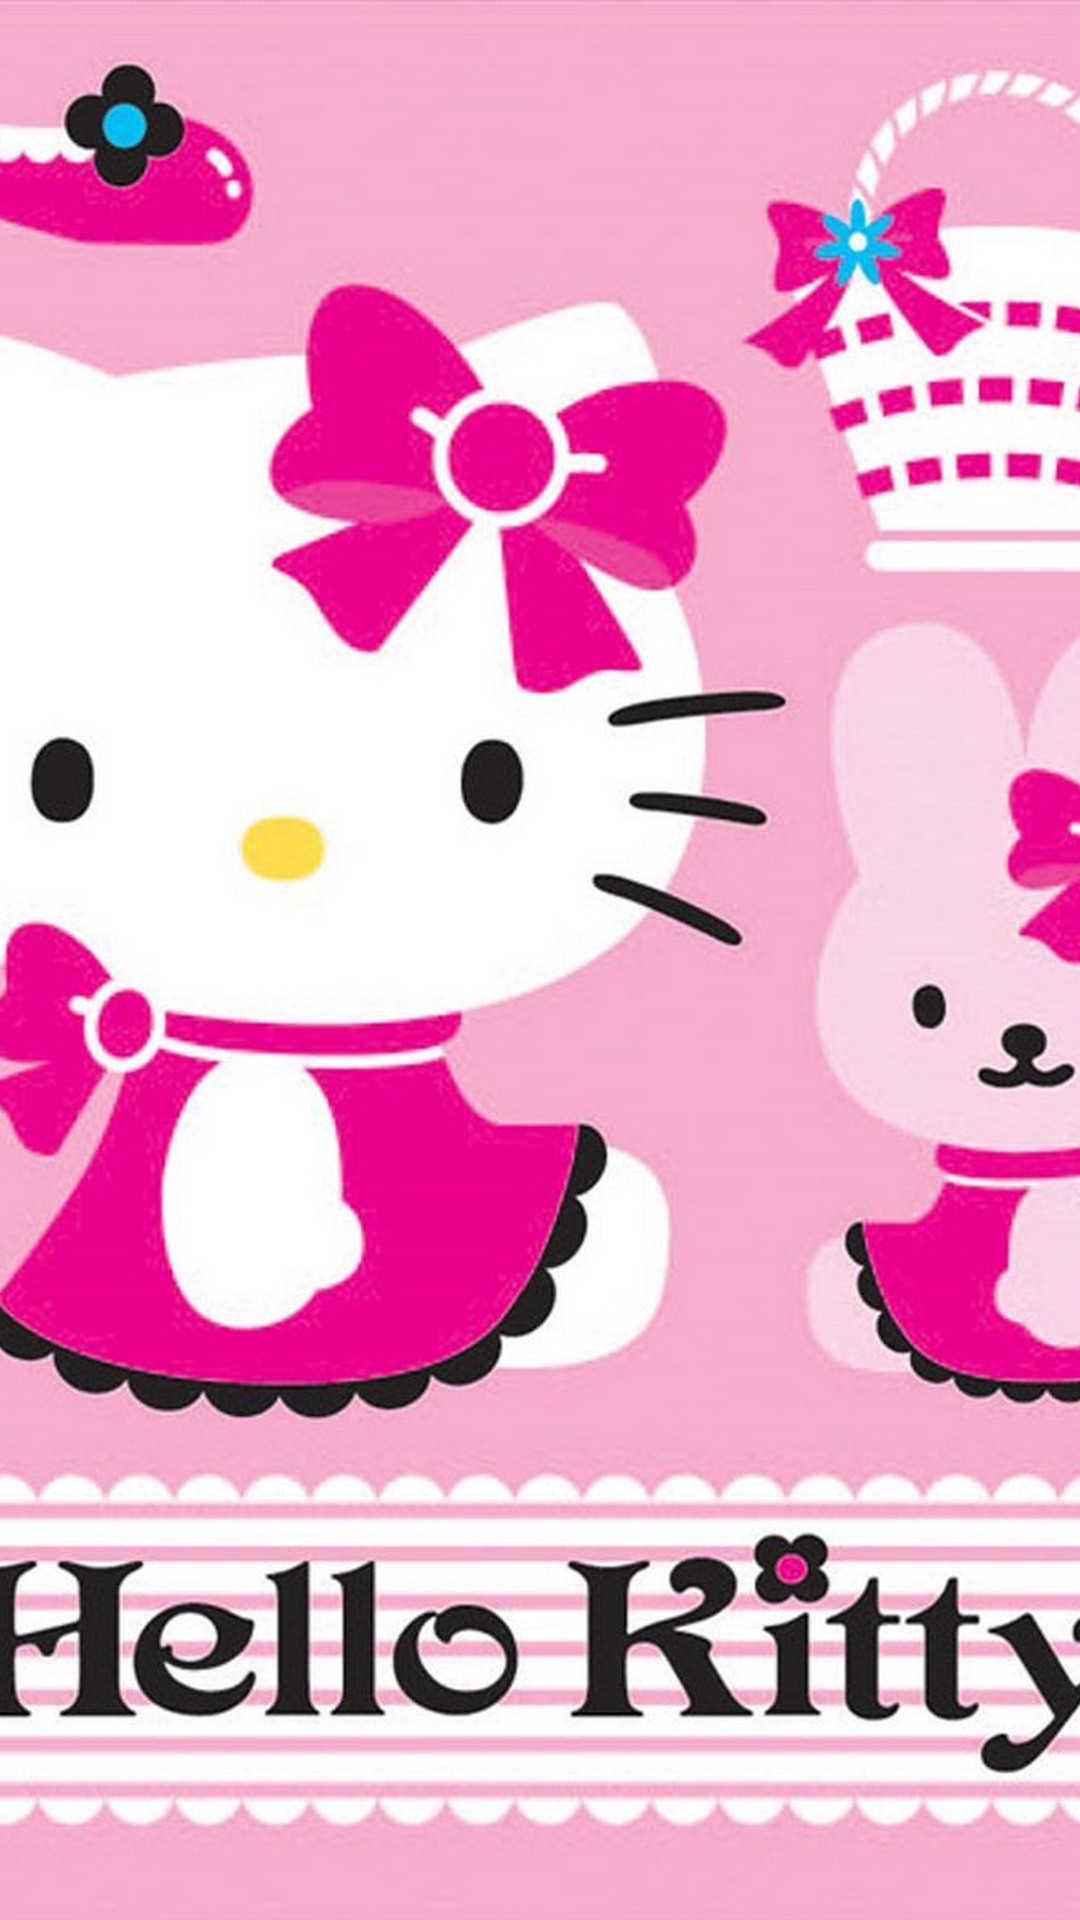 Wallpaper Hello Kitty Android with image resolution 1080x1920 pixel. You can make this wallpaper for your Android backgrounds, Tablet, Smartphones Screensavers and Mobile Phone Lock Screen